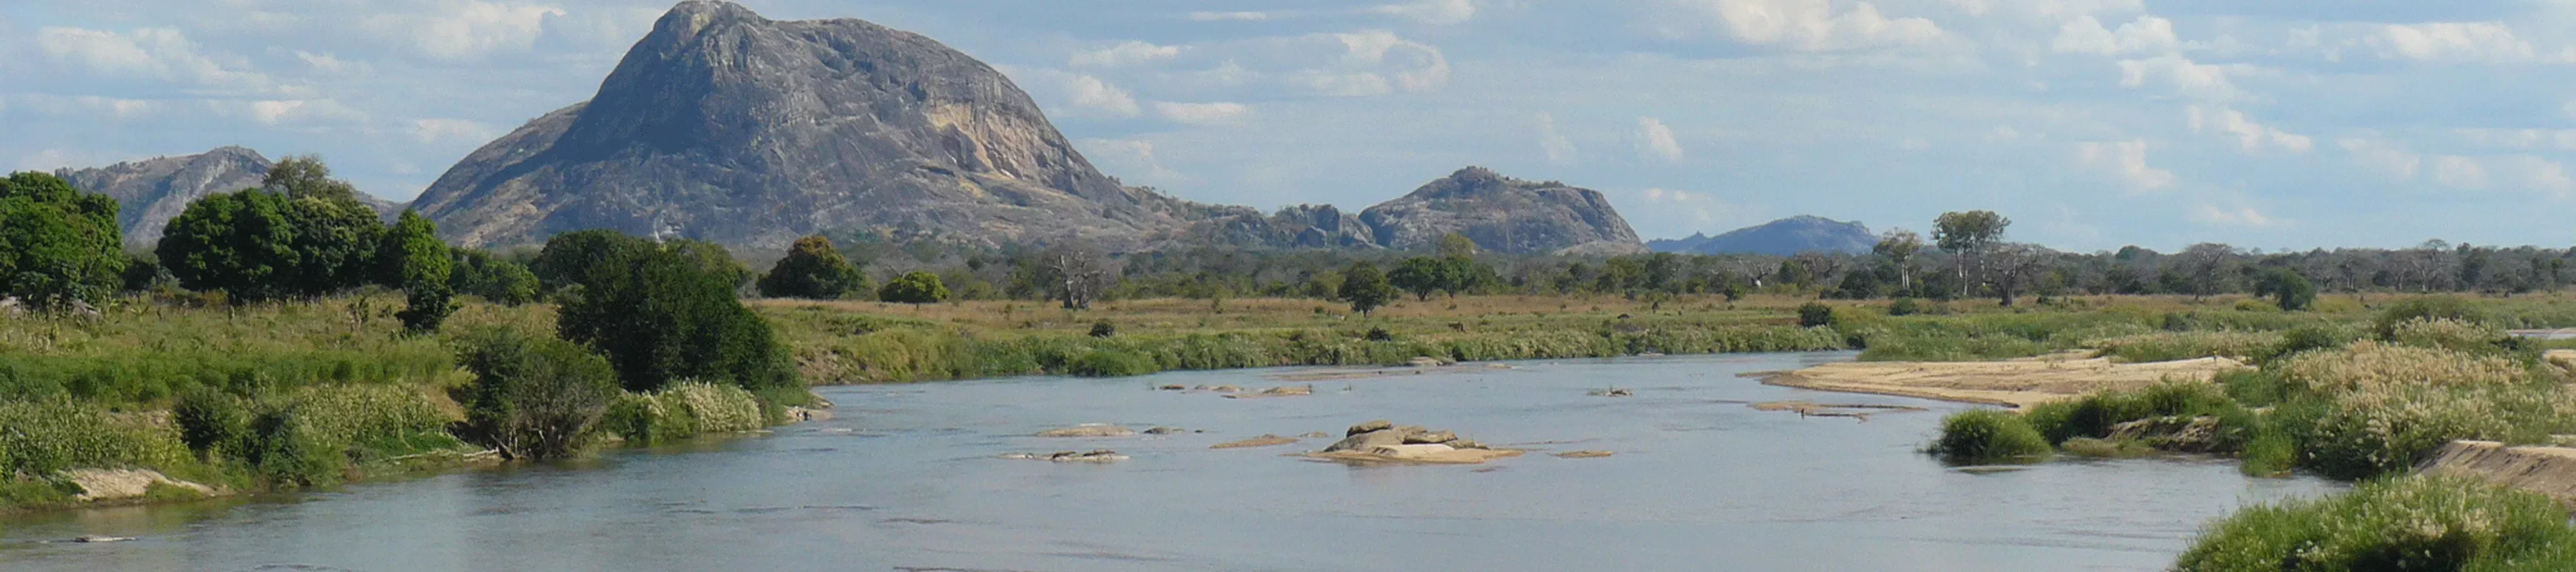 Large rock (Inselberg) in the distance with grassland and river in the foreground